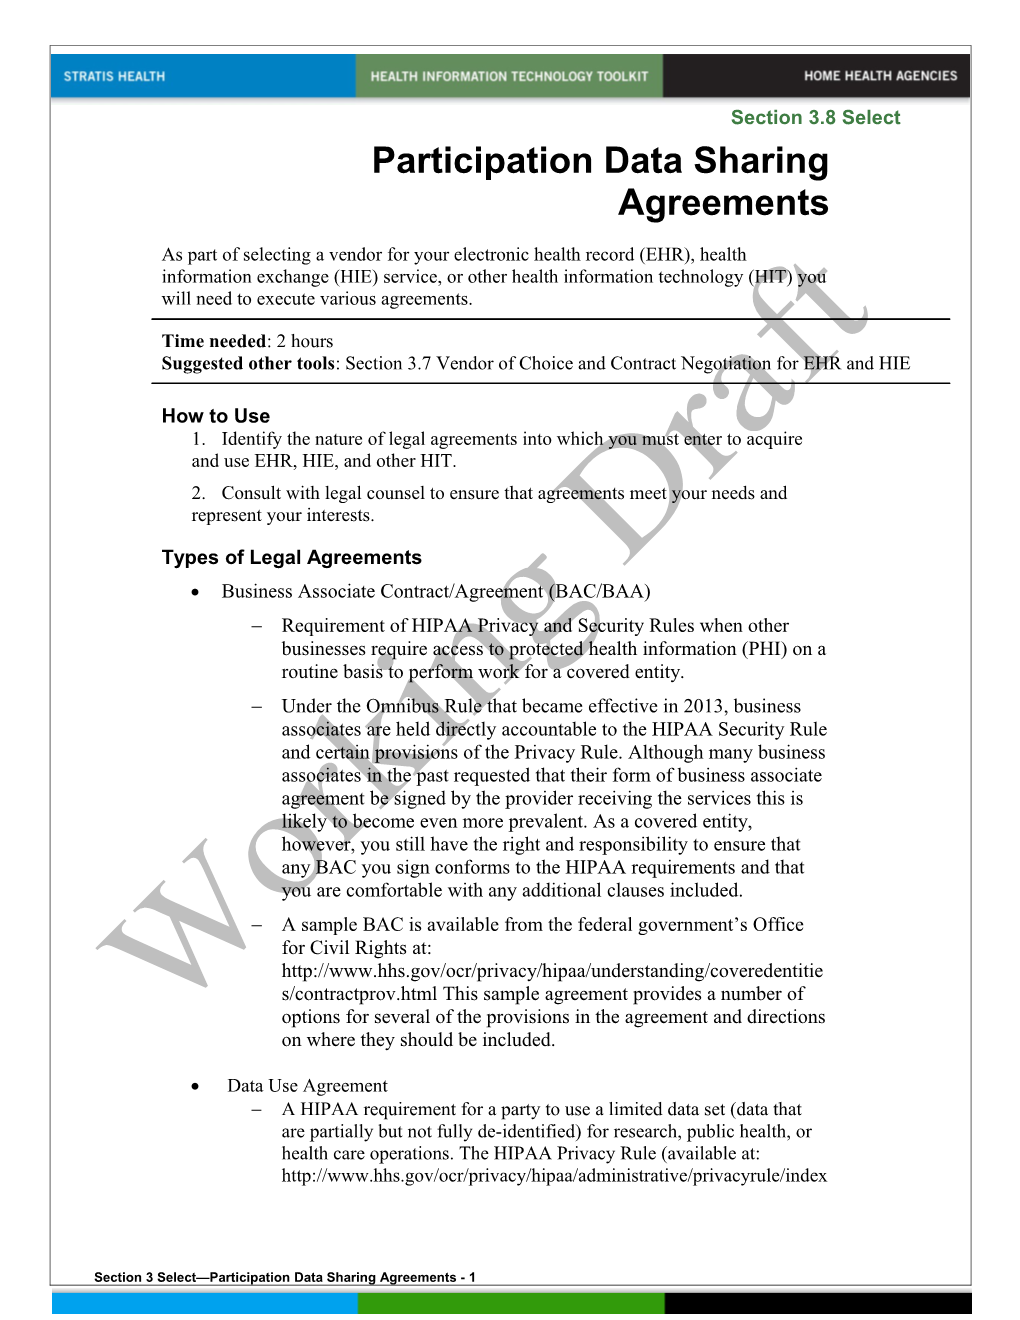 3 Participation Data Sharing Agreements